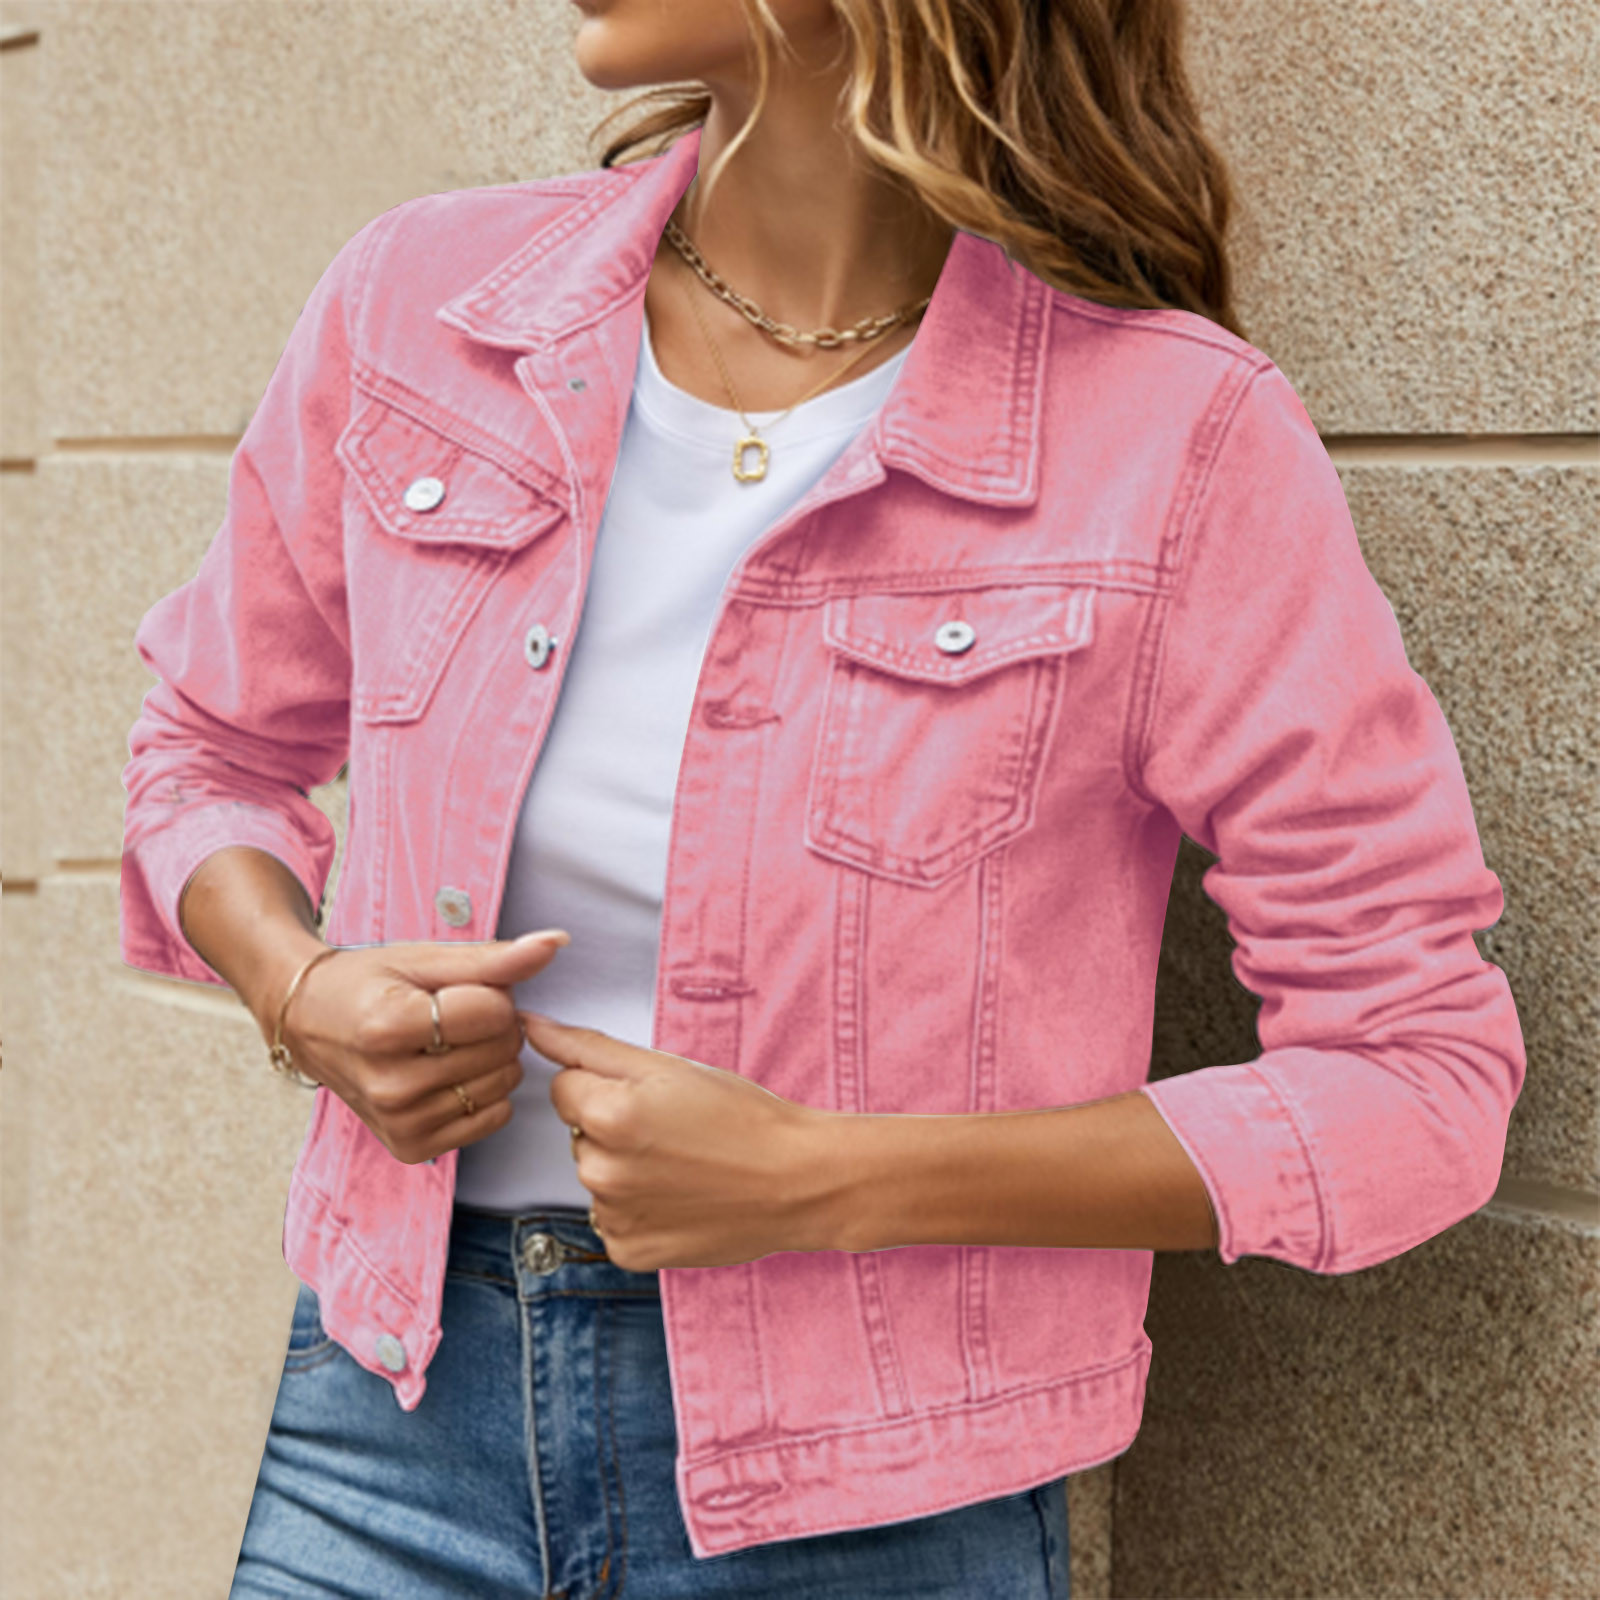 iOPQO womens sweaters Women's Basic Solid Color Button Down Denim Cotton Jacket With Pockets Denim Jacket Coat Women's Denim Jackets Pink S - image 2 of 9